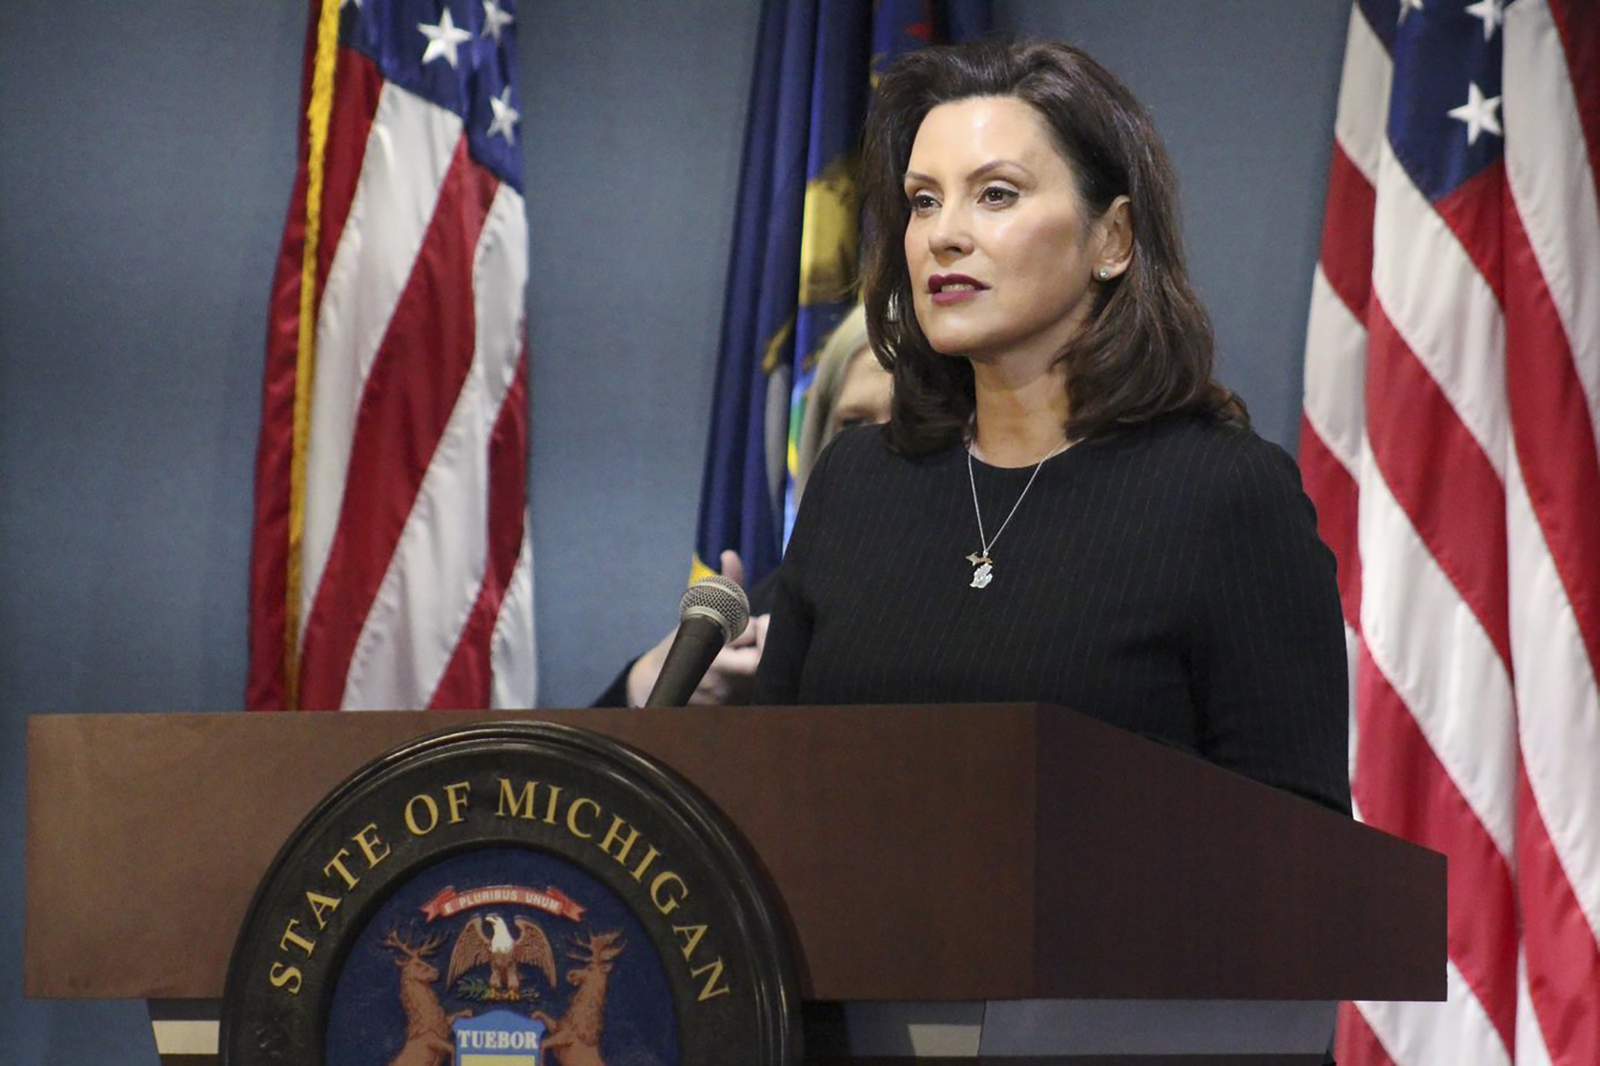 New York Times features Michigan Gov. Whitmer, her response to 2020 crises